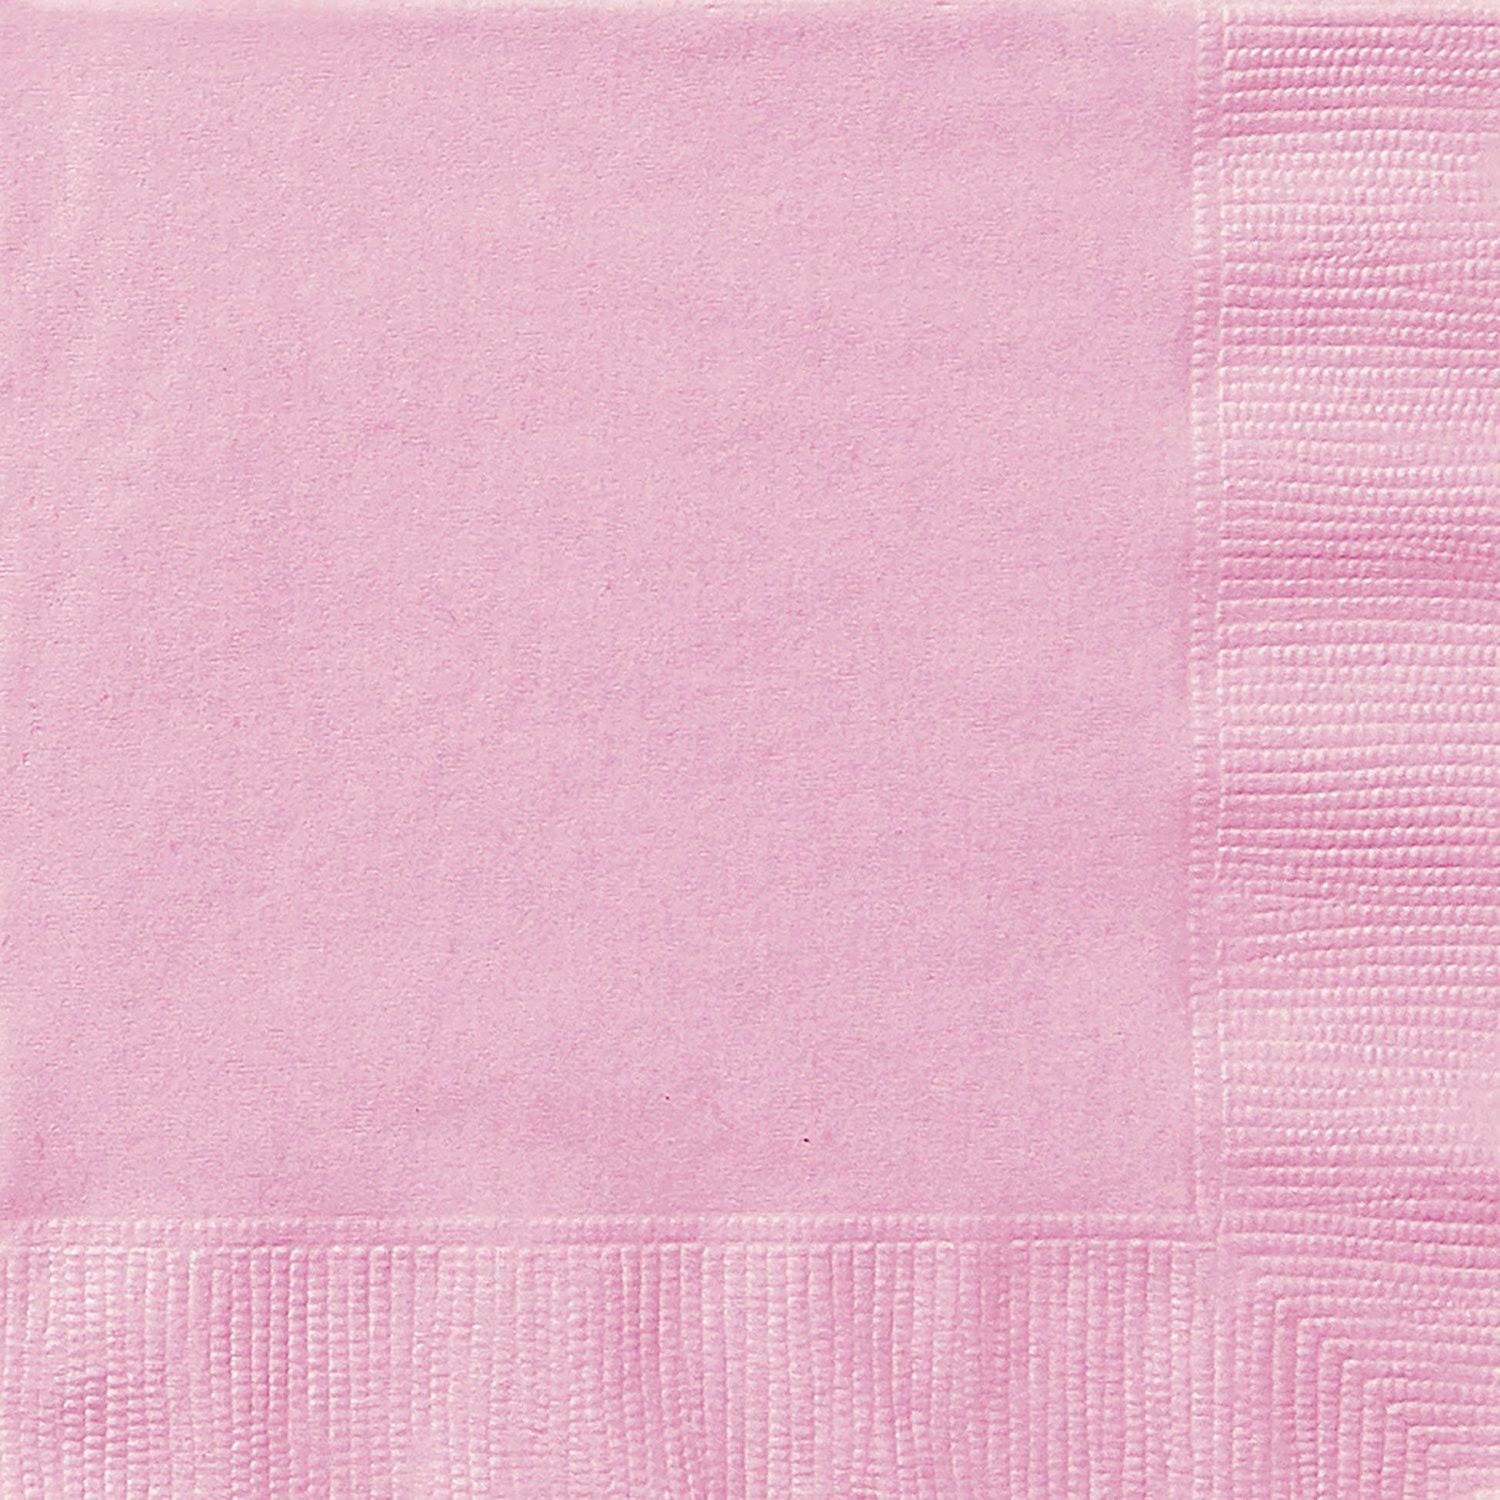 Unique Lovely Pink Lunch Napkins